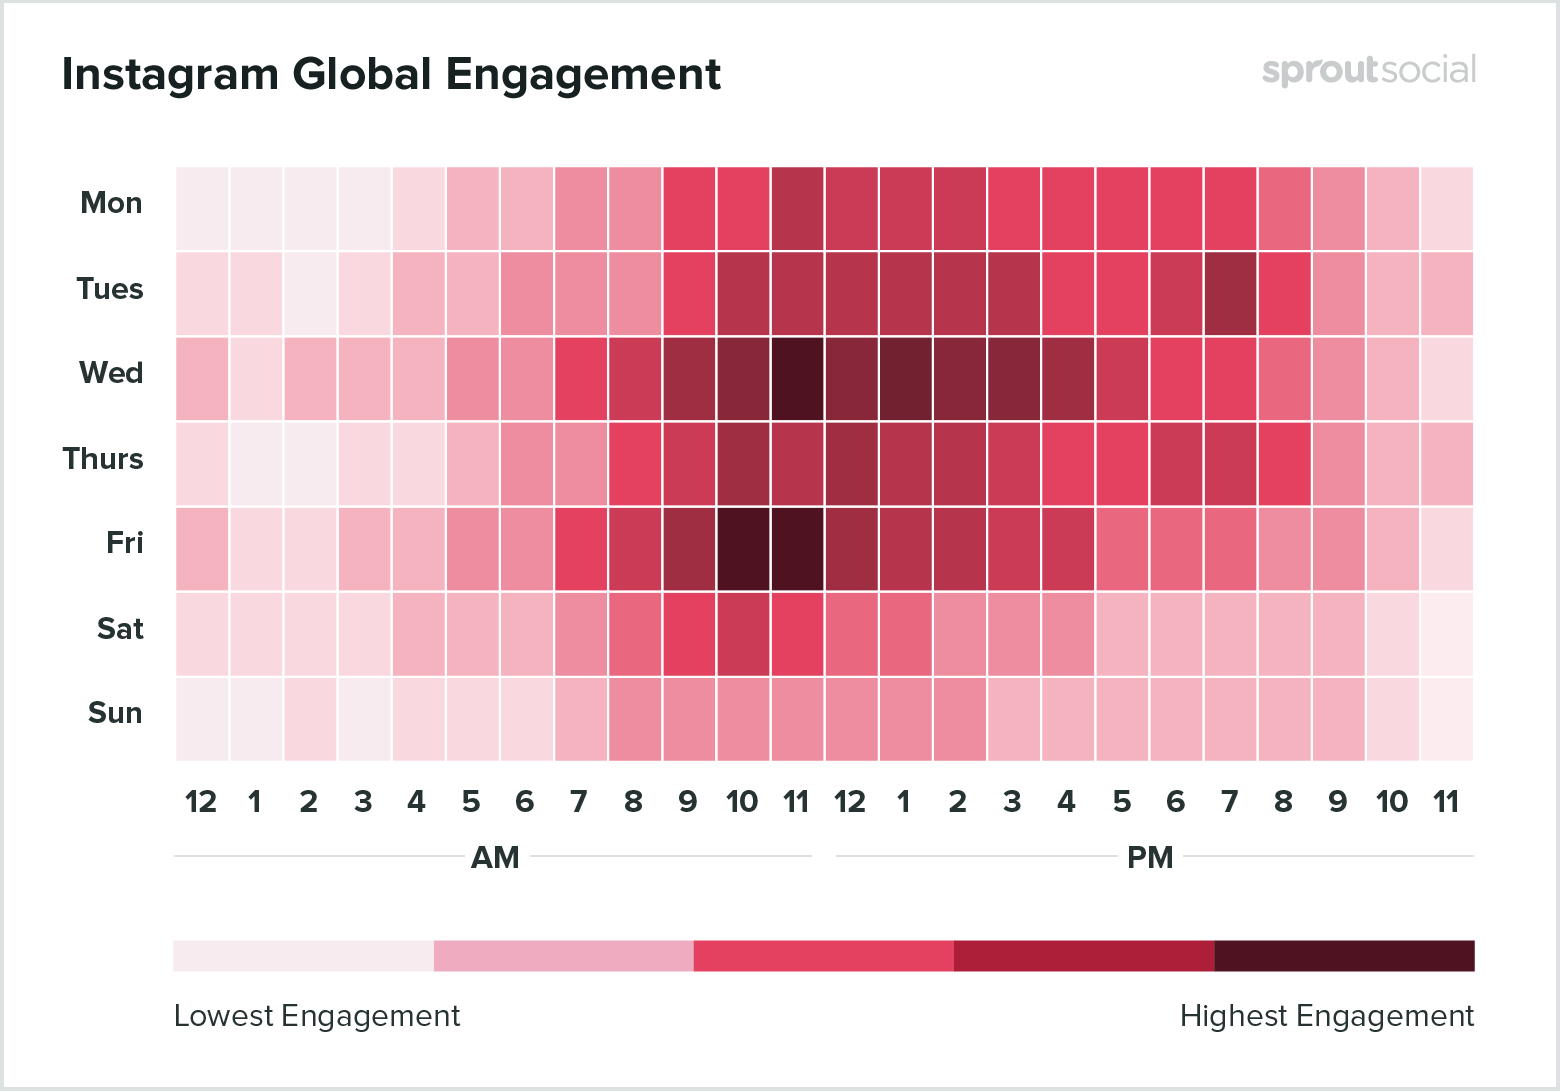 What Are the Best Times to Post Content on Instagram for Optimal Engagement?